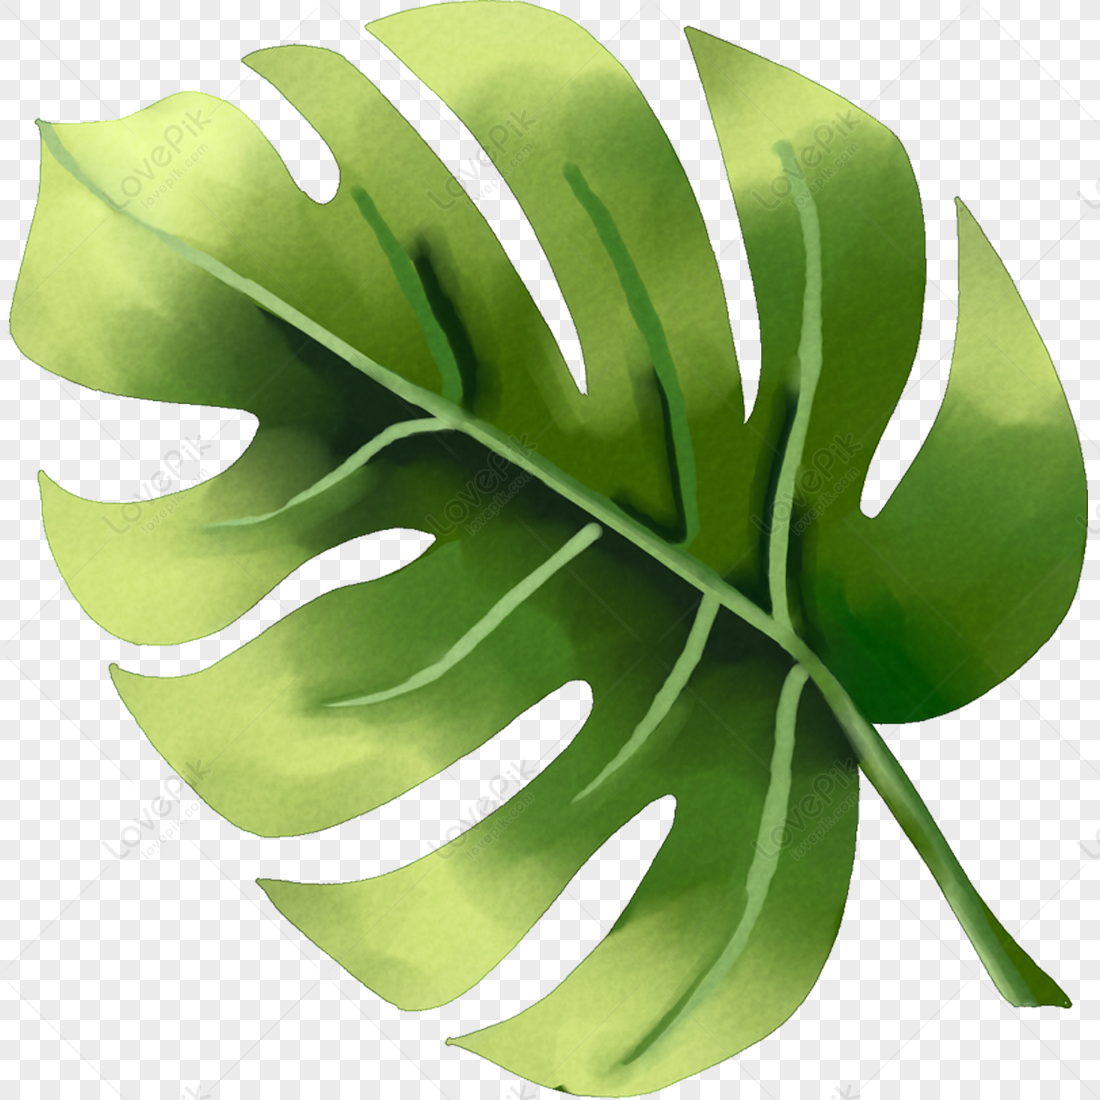 Cartoon Leaves PNG Picture And Clipart Image For Free Download - Lovepik |  400205005